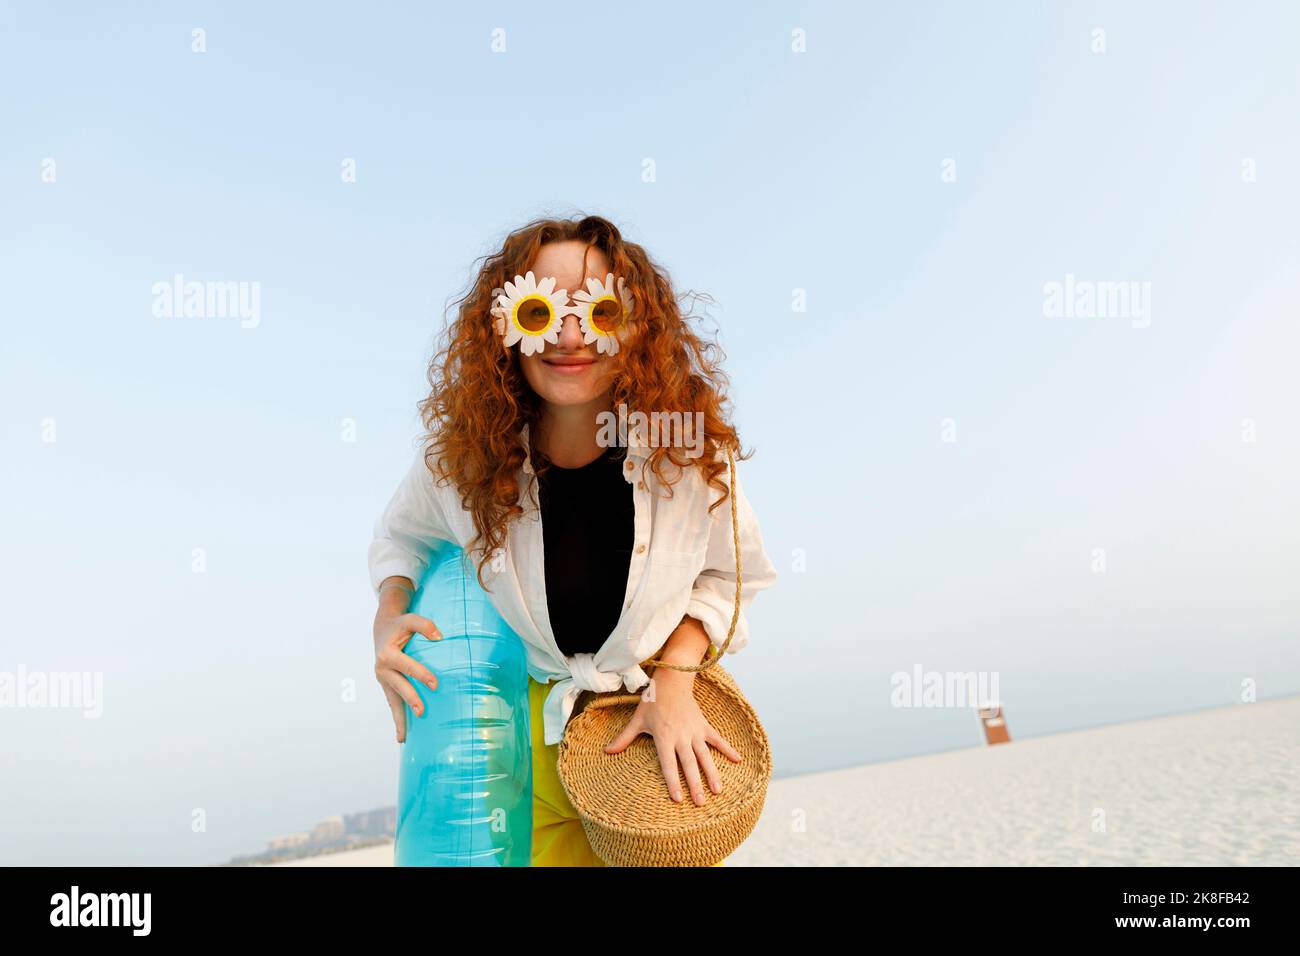 Smiling woman wearing sunflower sunglasses holding blue inflatable ring at beach Stock Photo